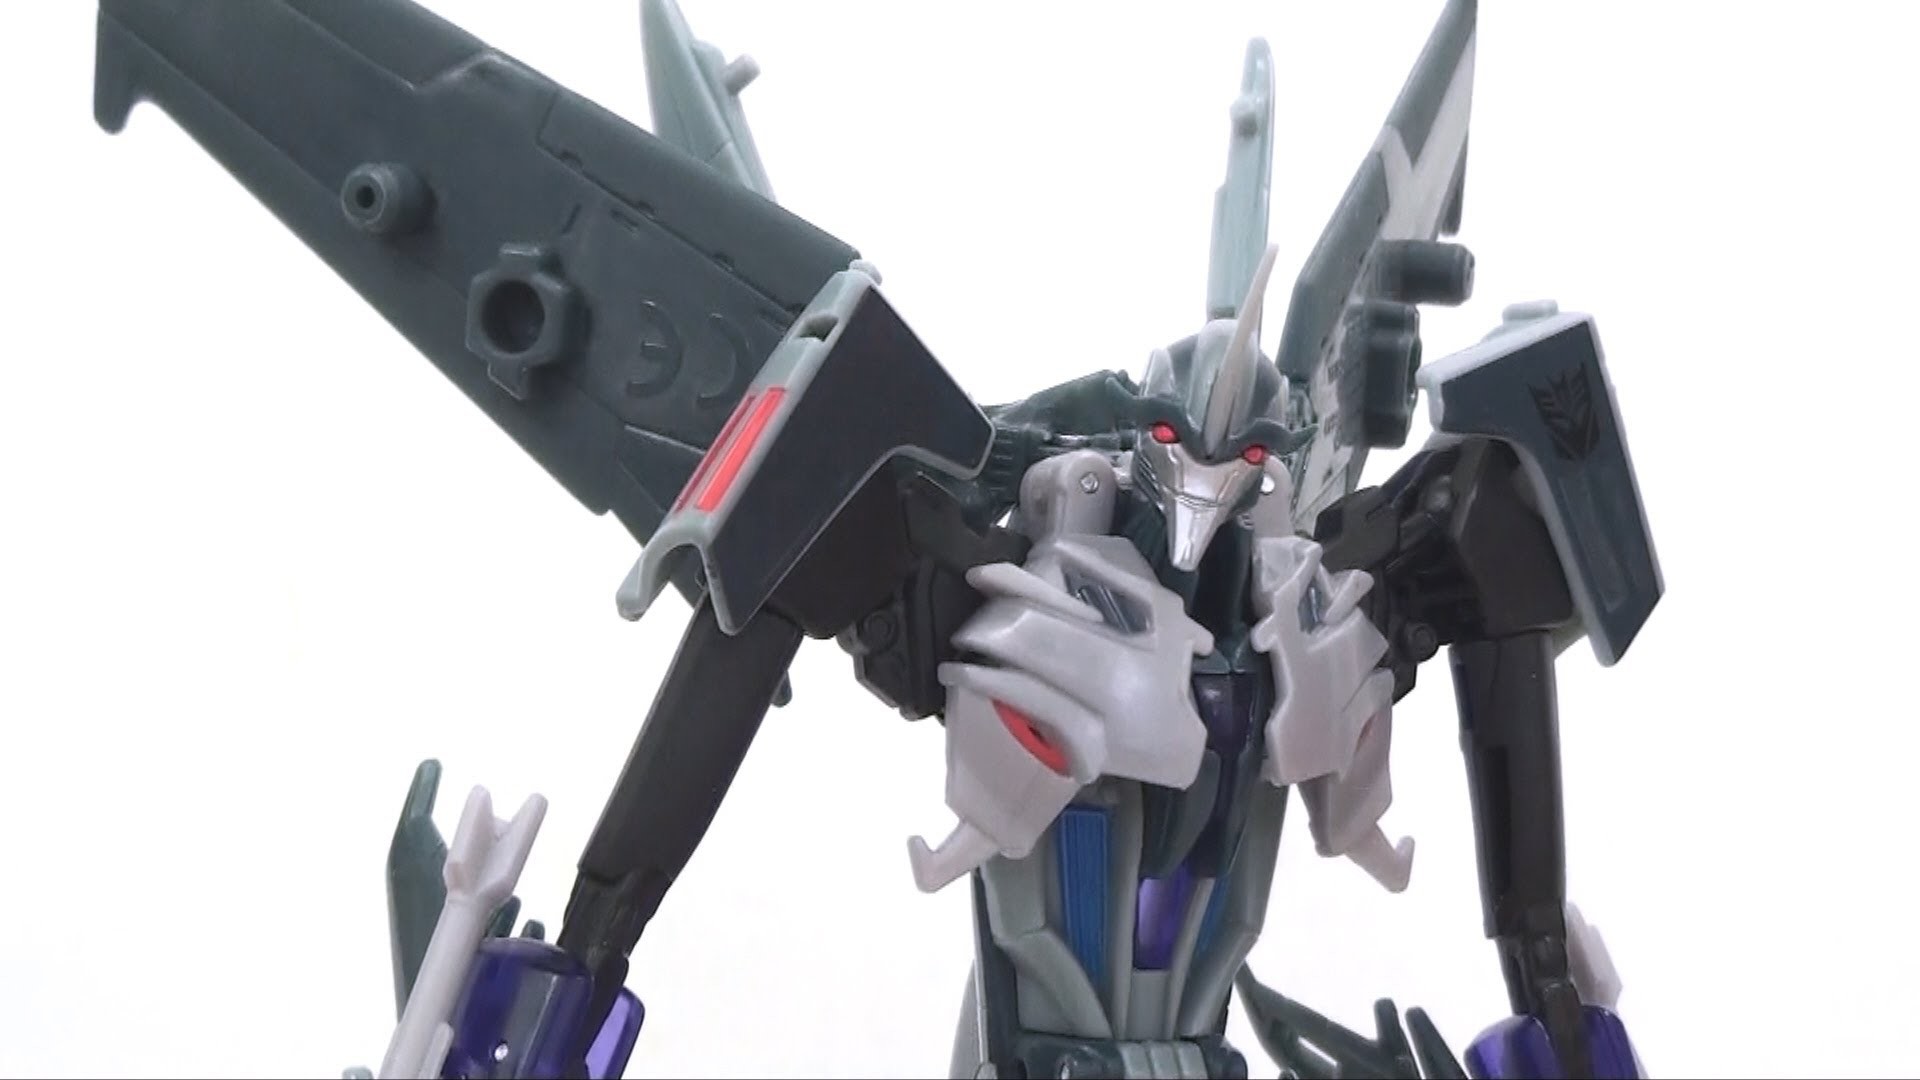 1920x1080 Video Review of the Transformers Prime (RiD) Voyager Class: Starscream -  YouTube